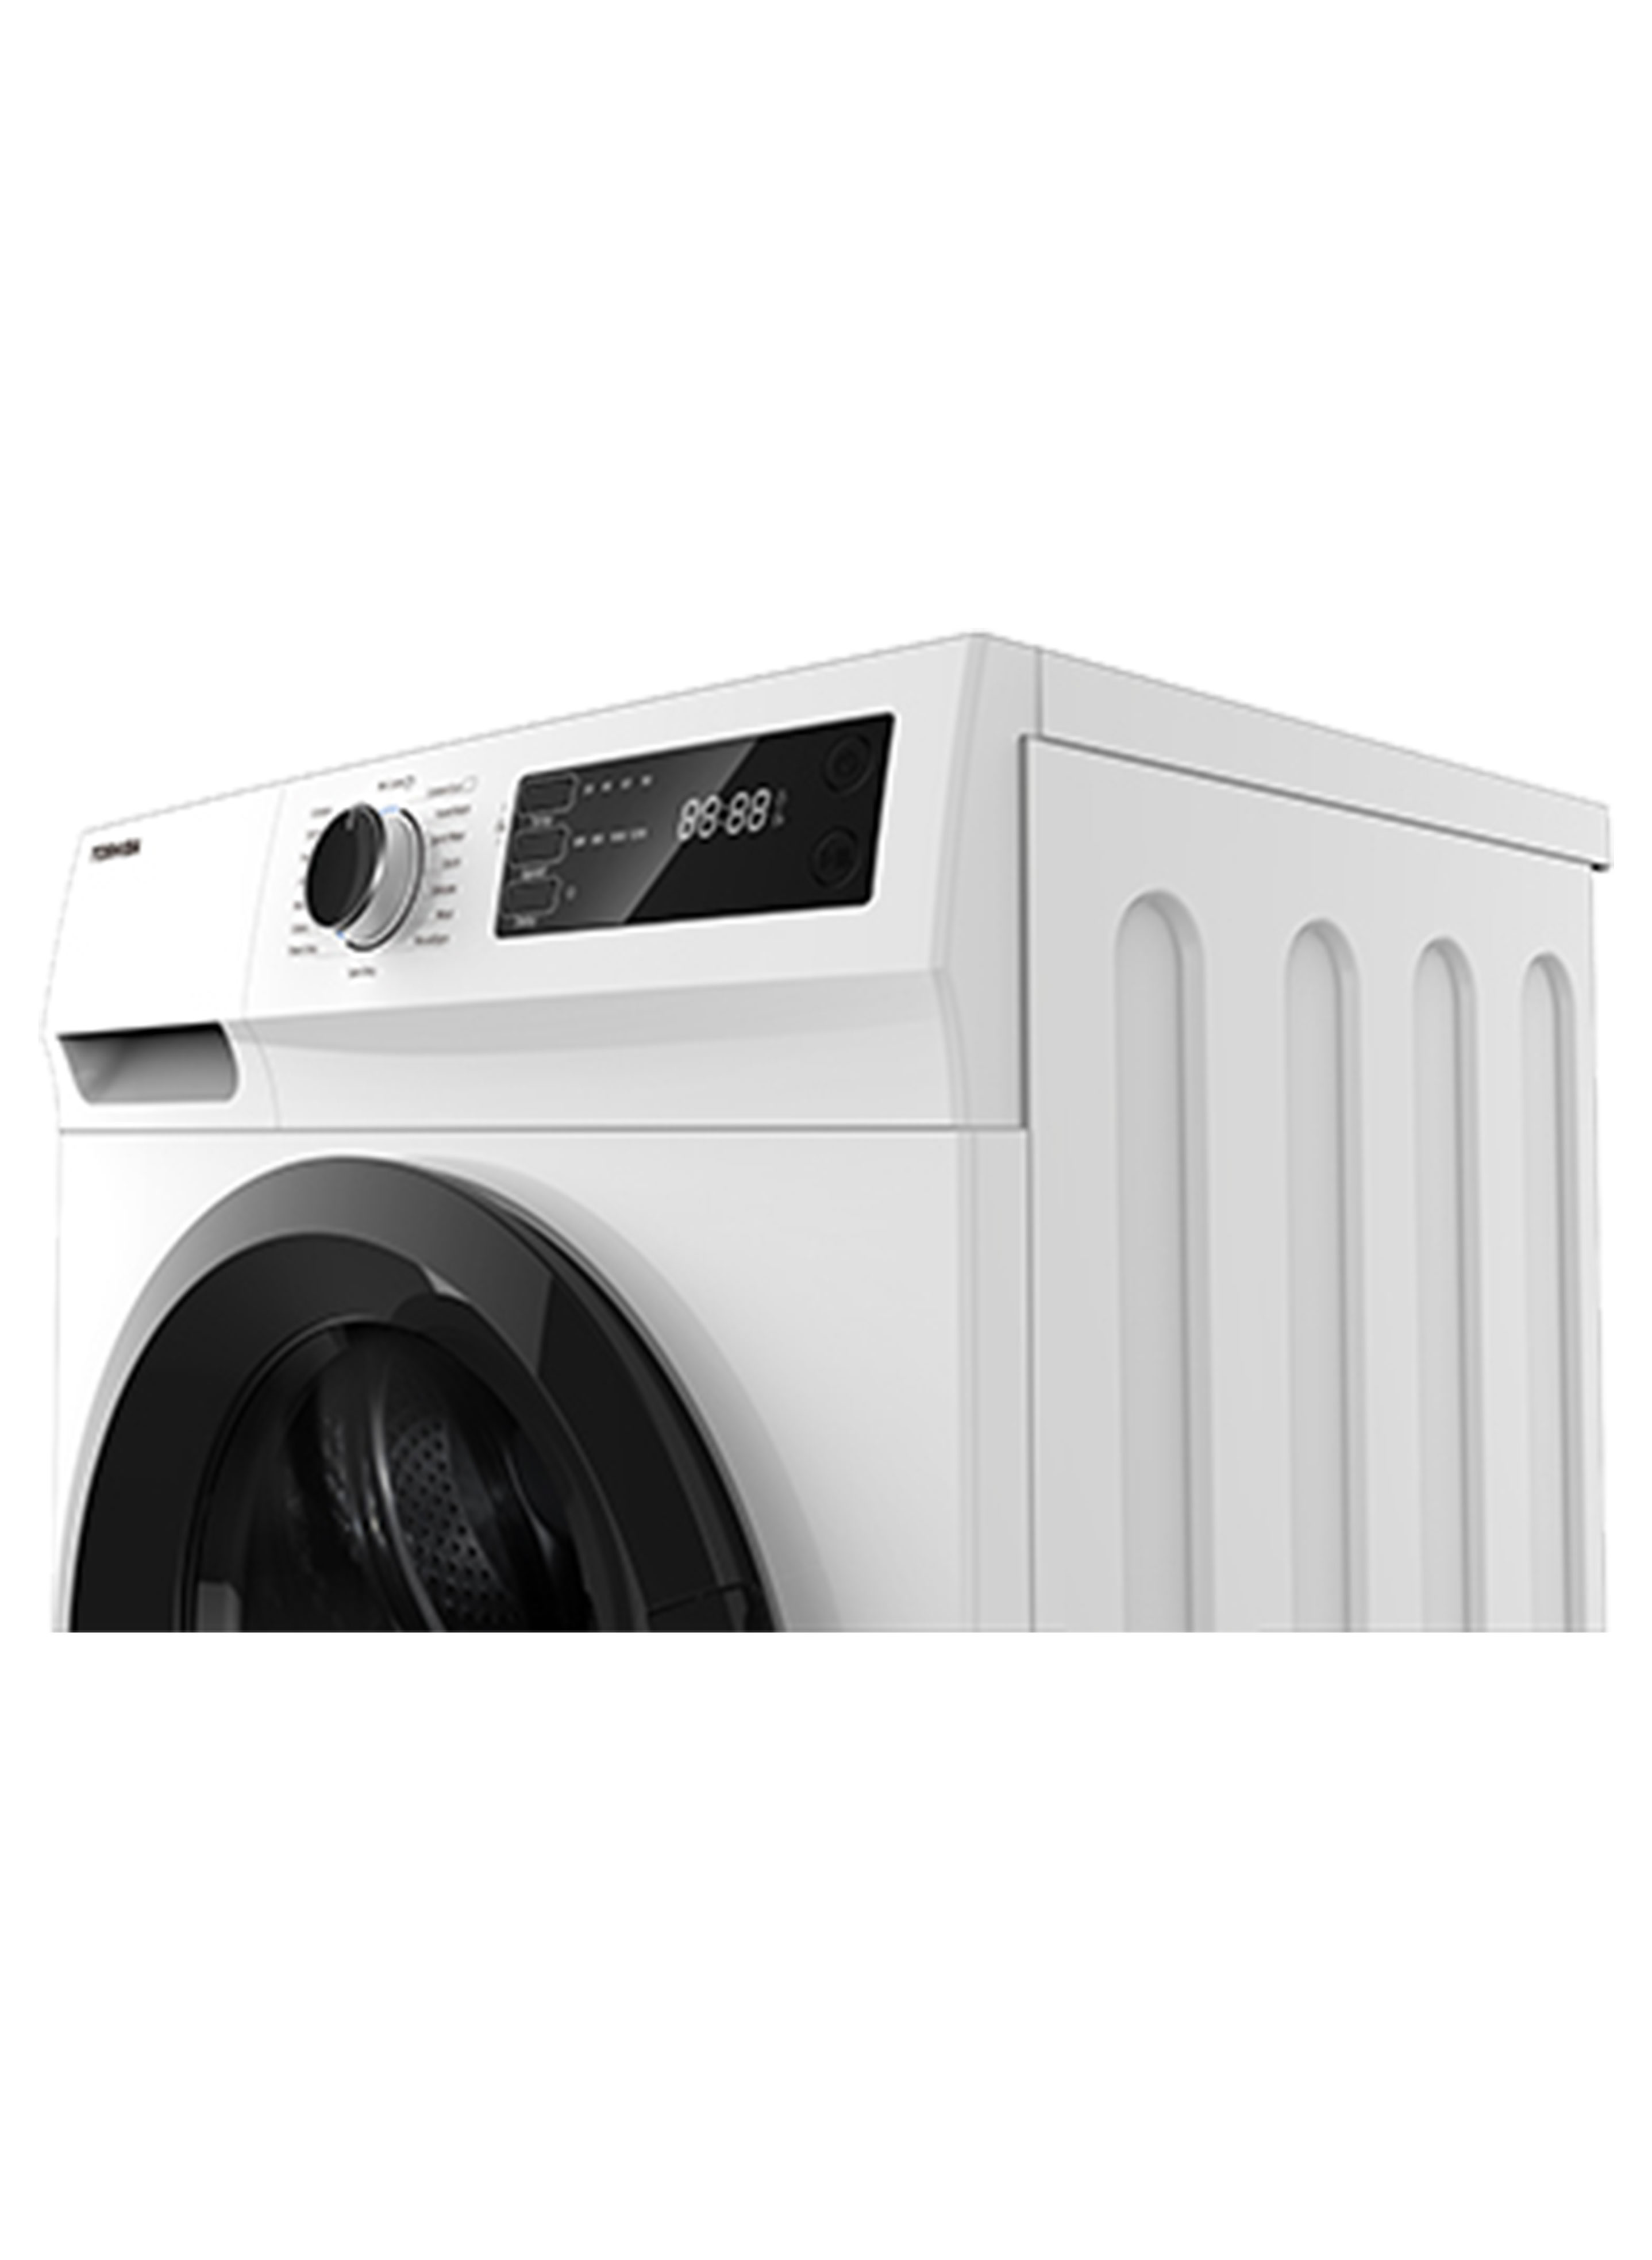 7 KG, FRONT LOAD WASHING MACHINE WITH 15' QUICK WASH